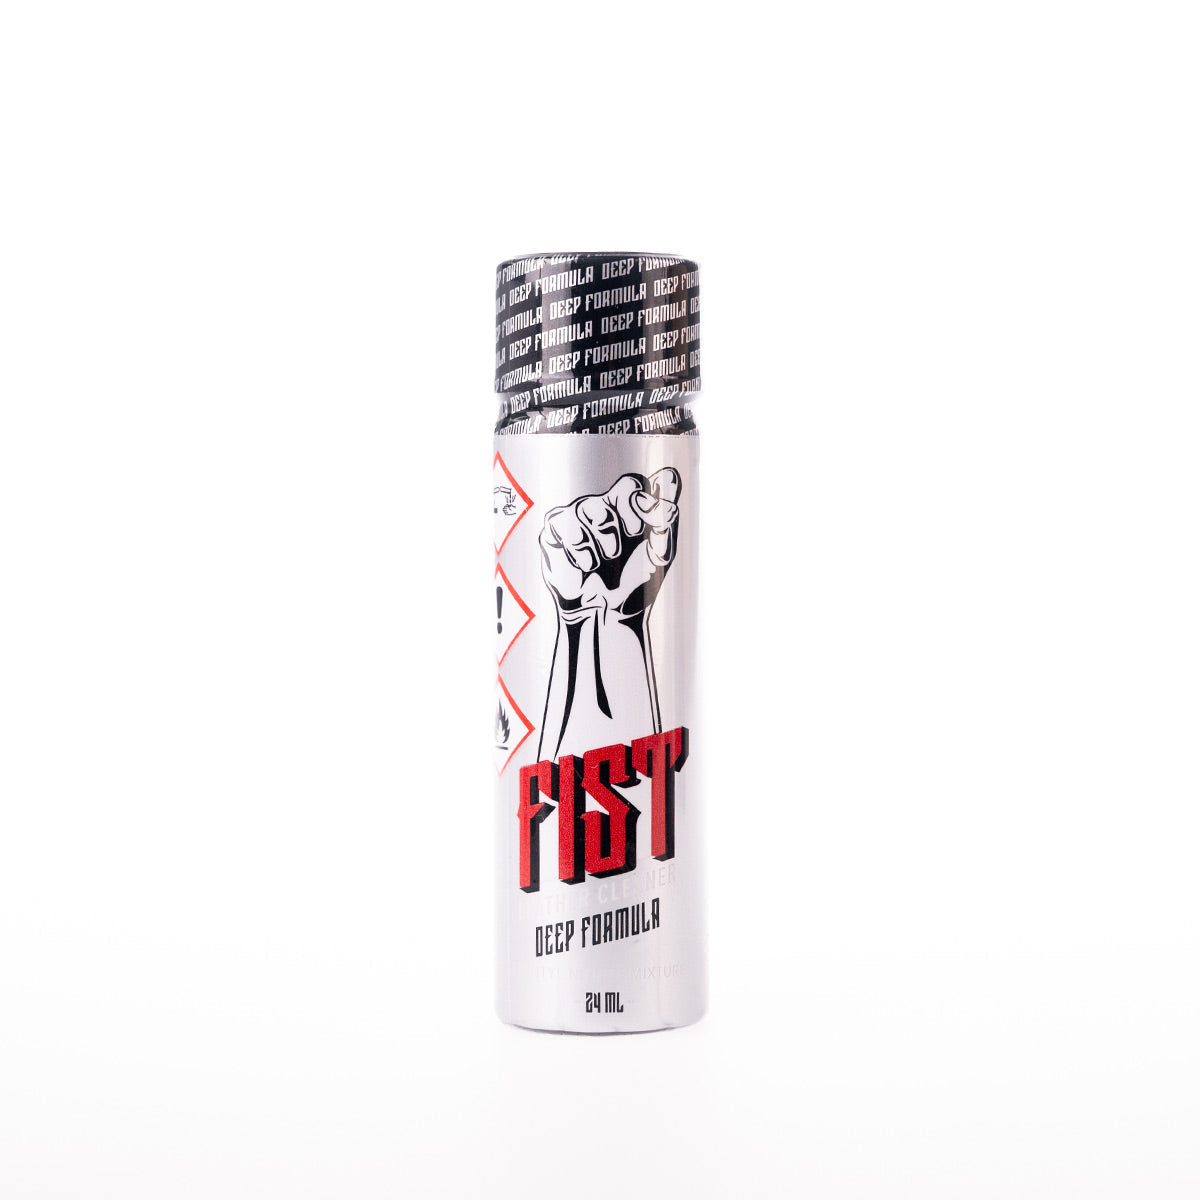 Fist Pentyl 24ml, POPPERS UK, POPPERS USA, FREE DELIVERY, NEXT DAY DELIVERY